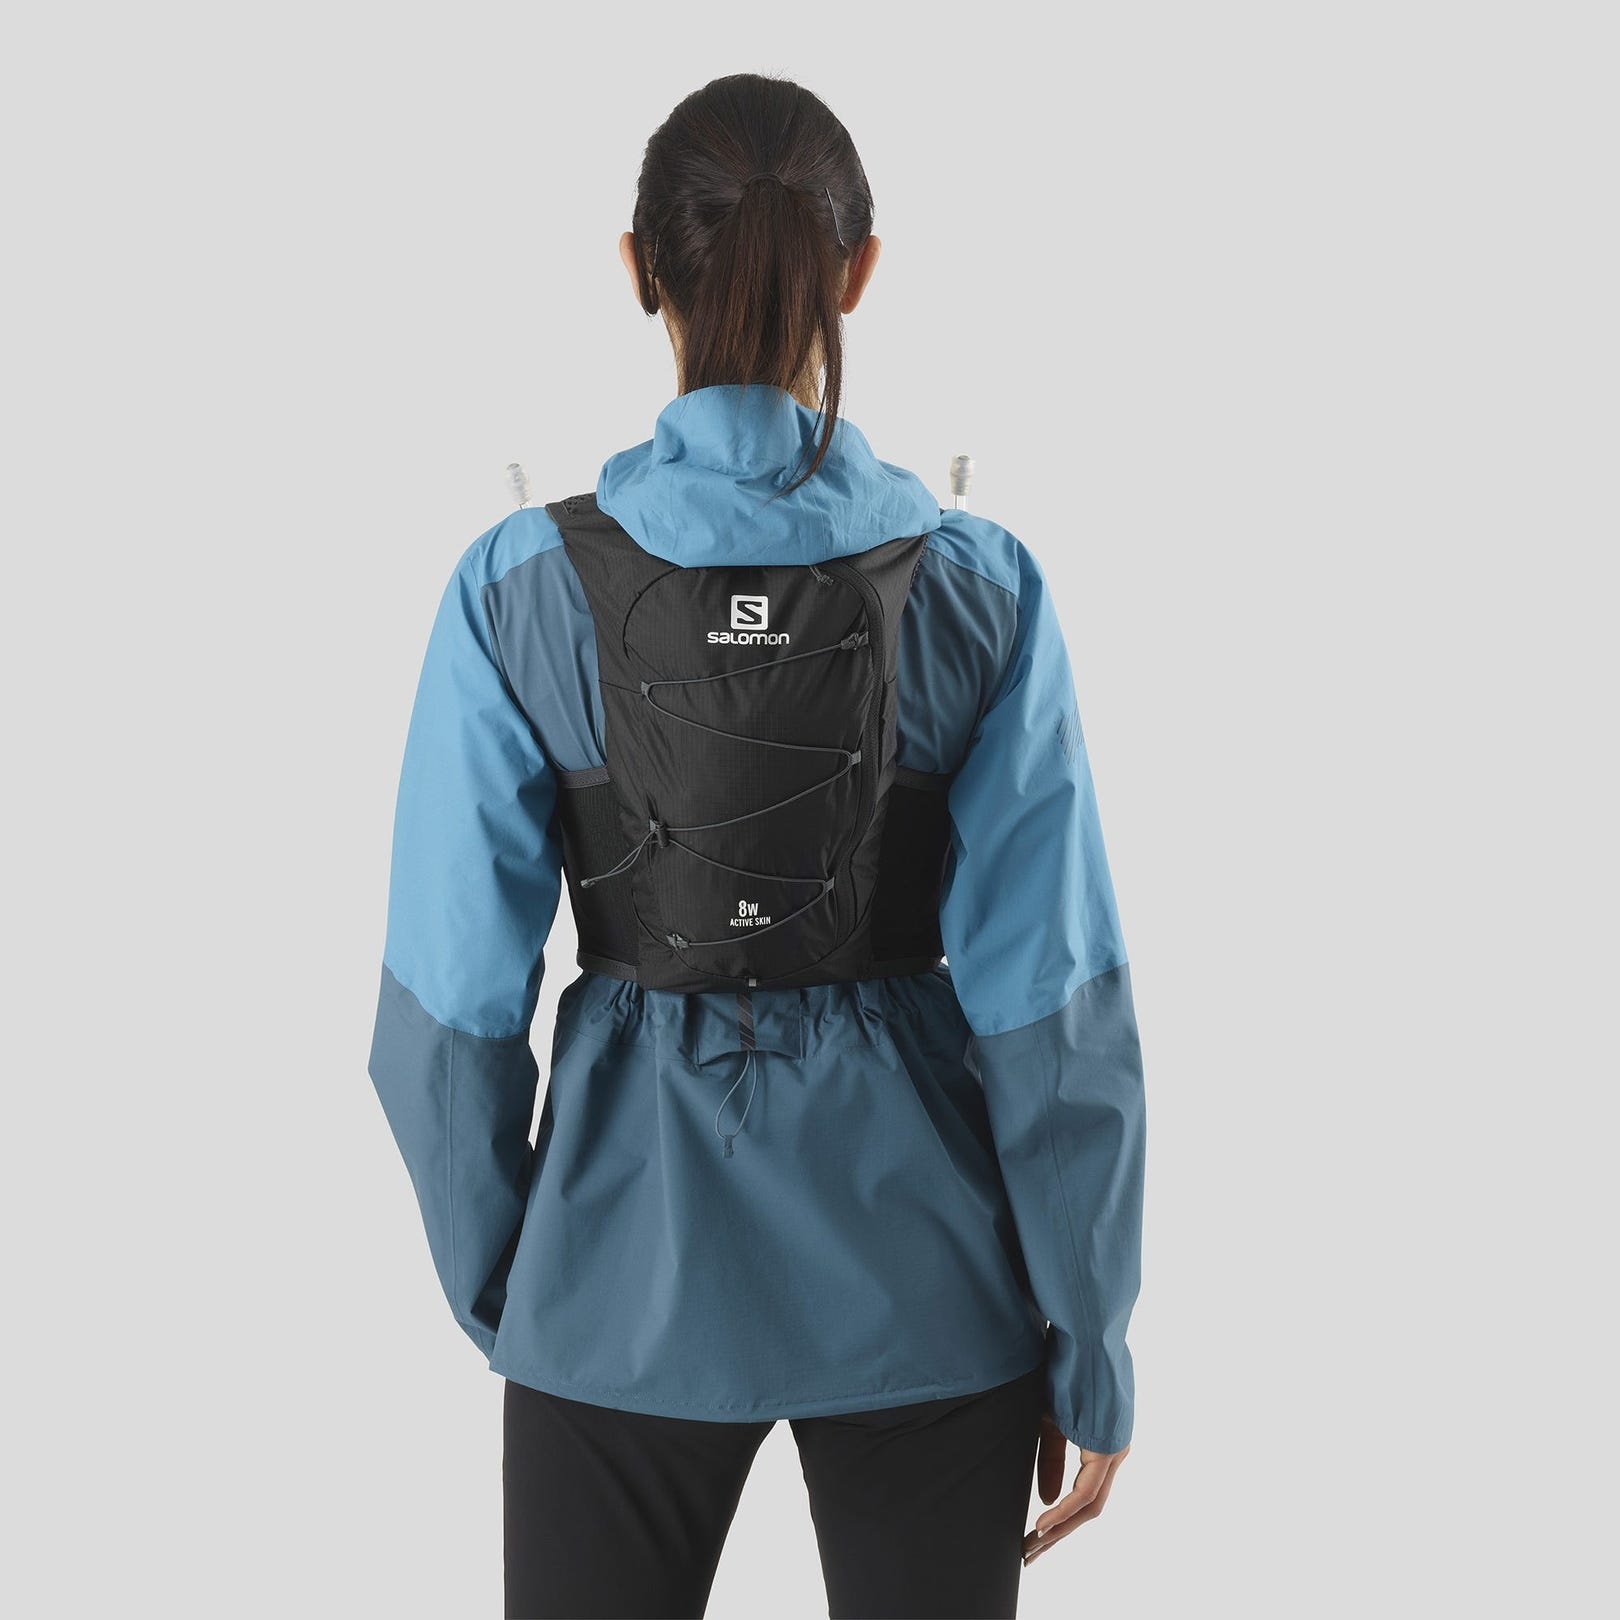 W's Active Skin 8 with flasks - The Guides Hut